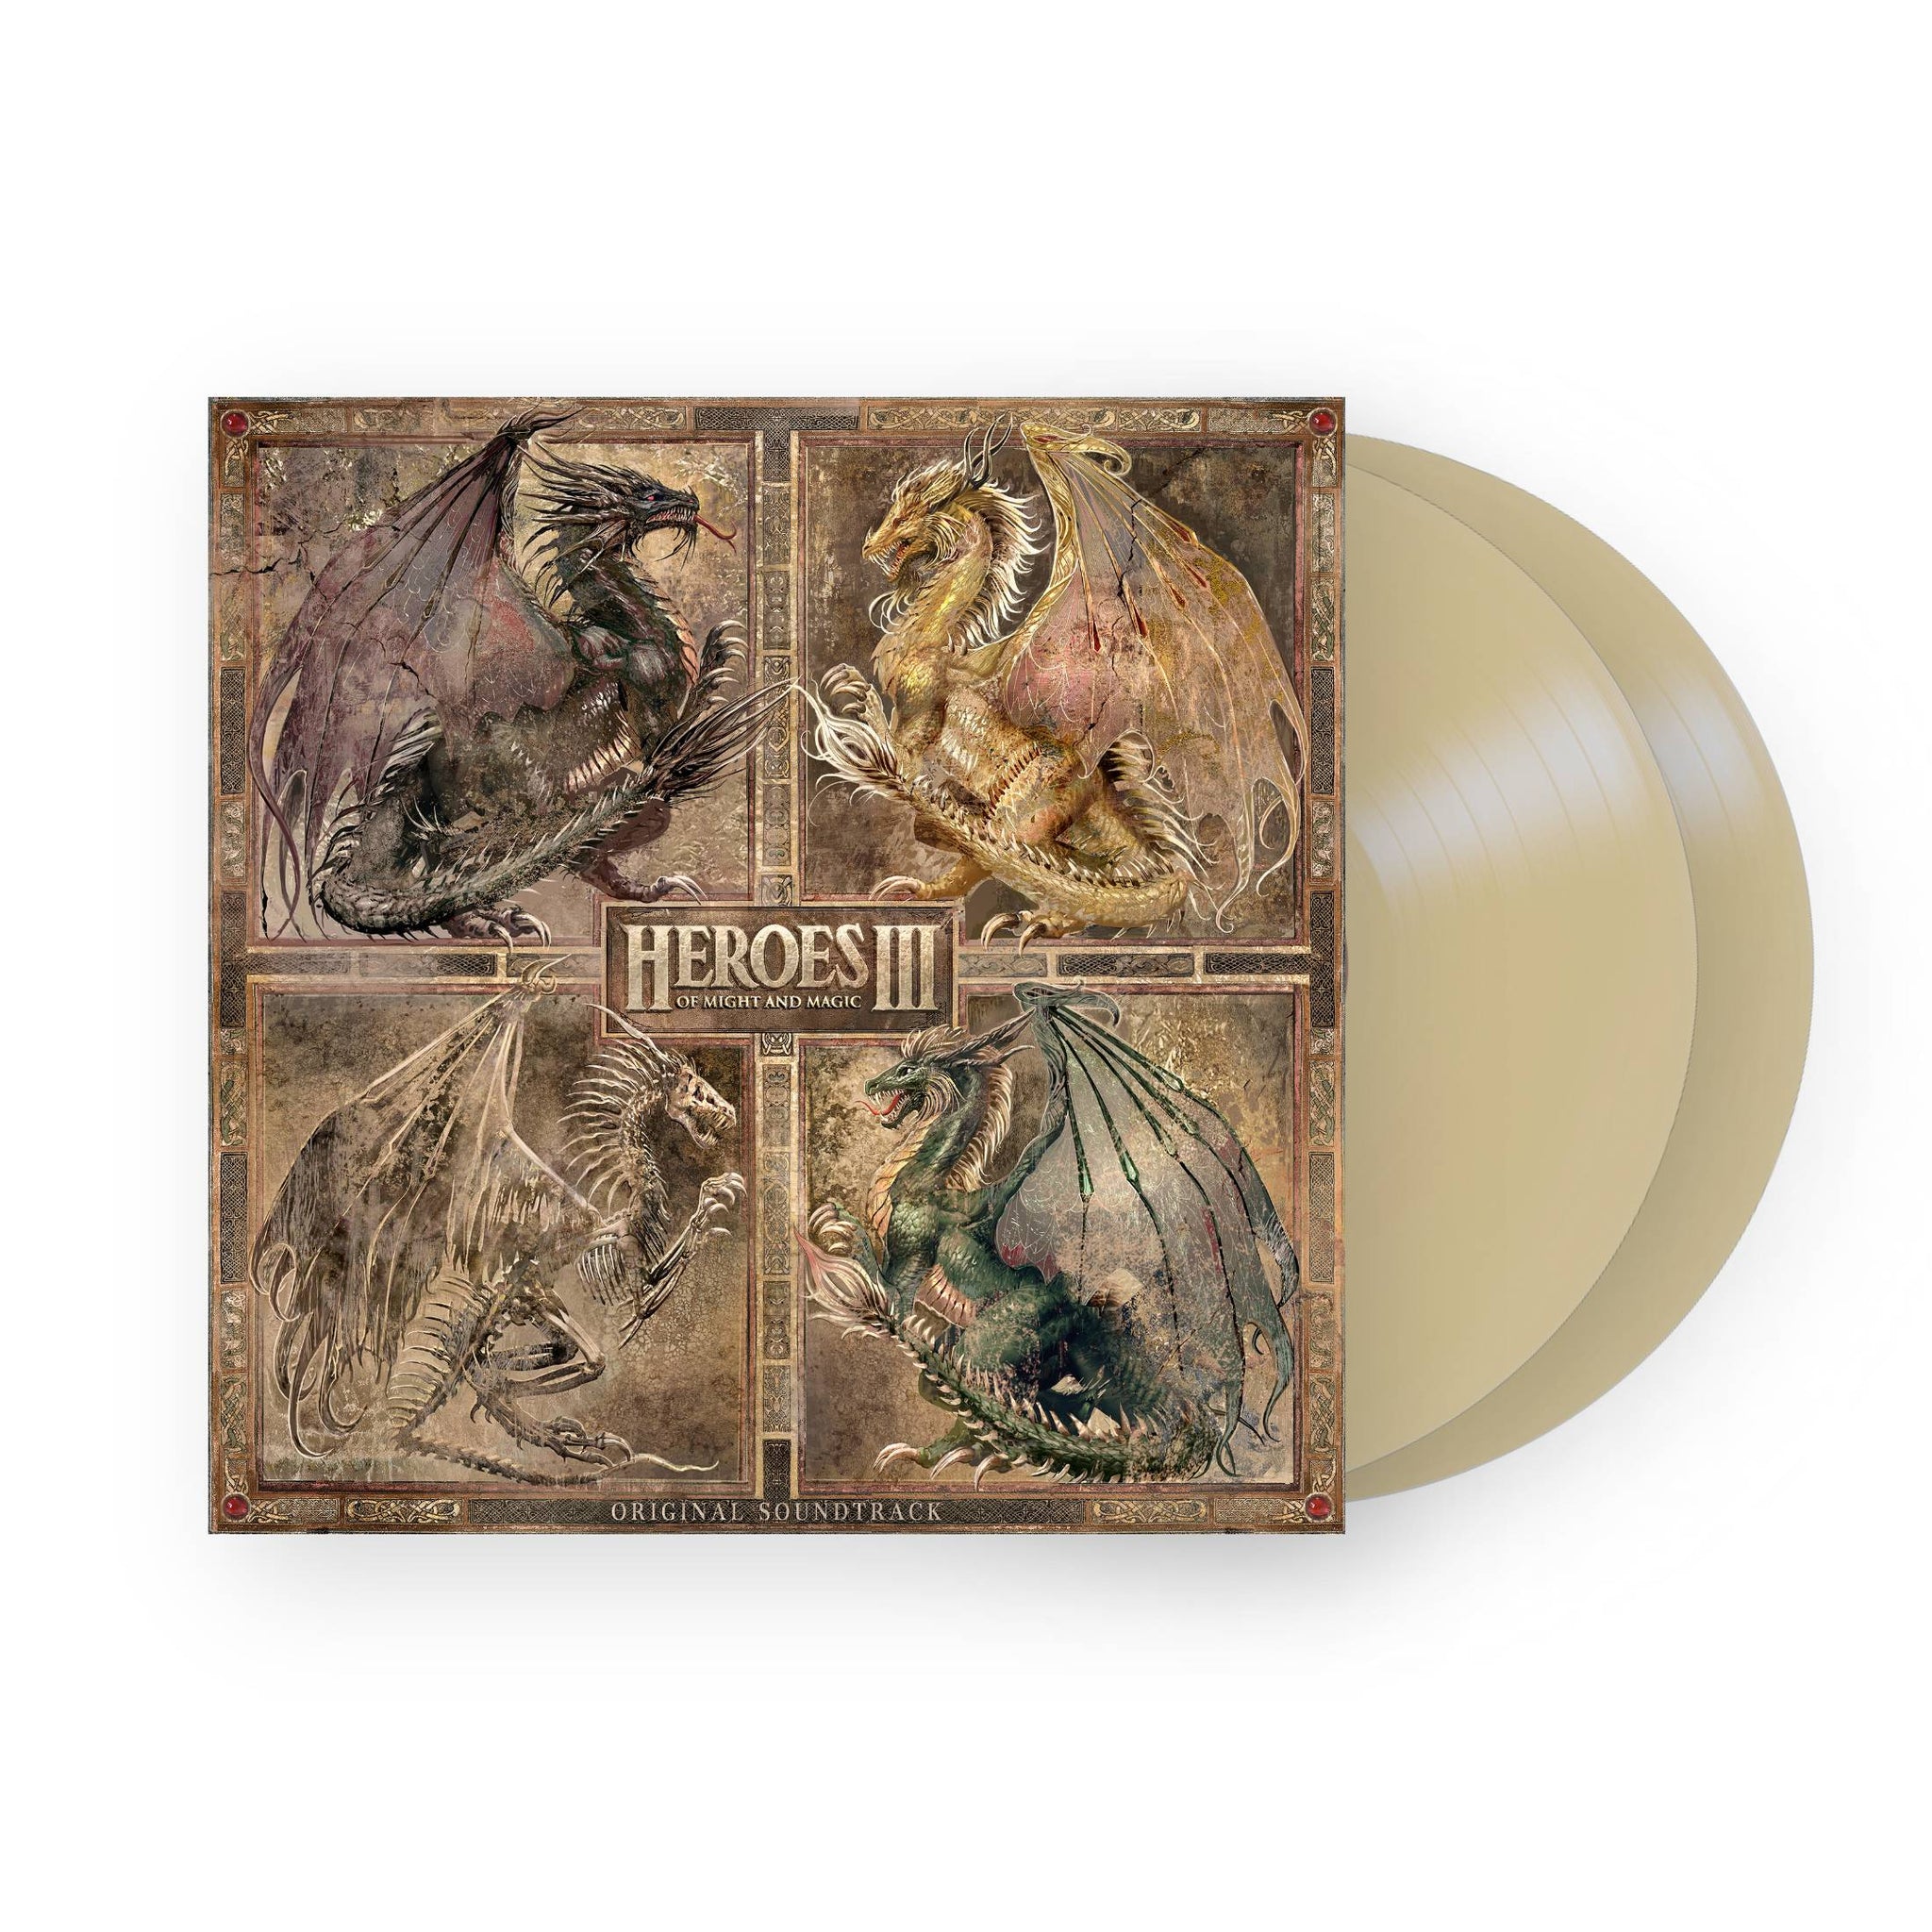 Heroes of Might and Magic III (Original Soundtrack) by Paul Anthony Romero  Rob King 2xLP  (Stronghold Tan Vinyl)